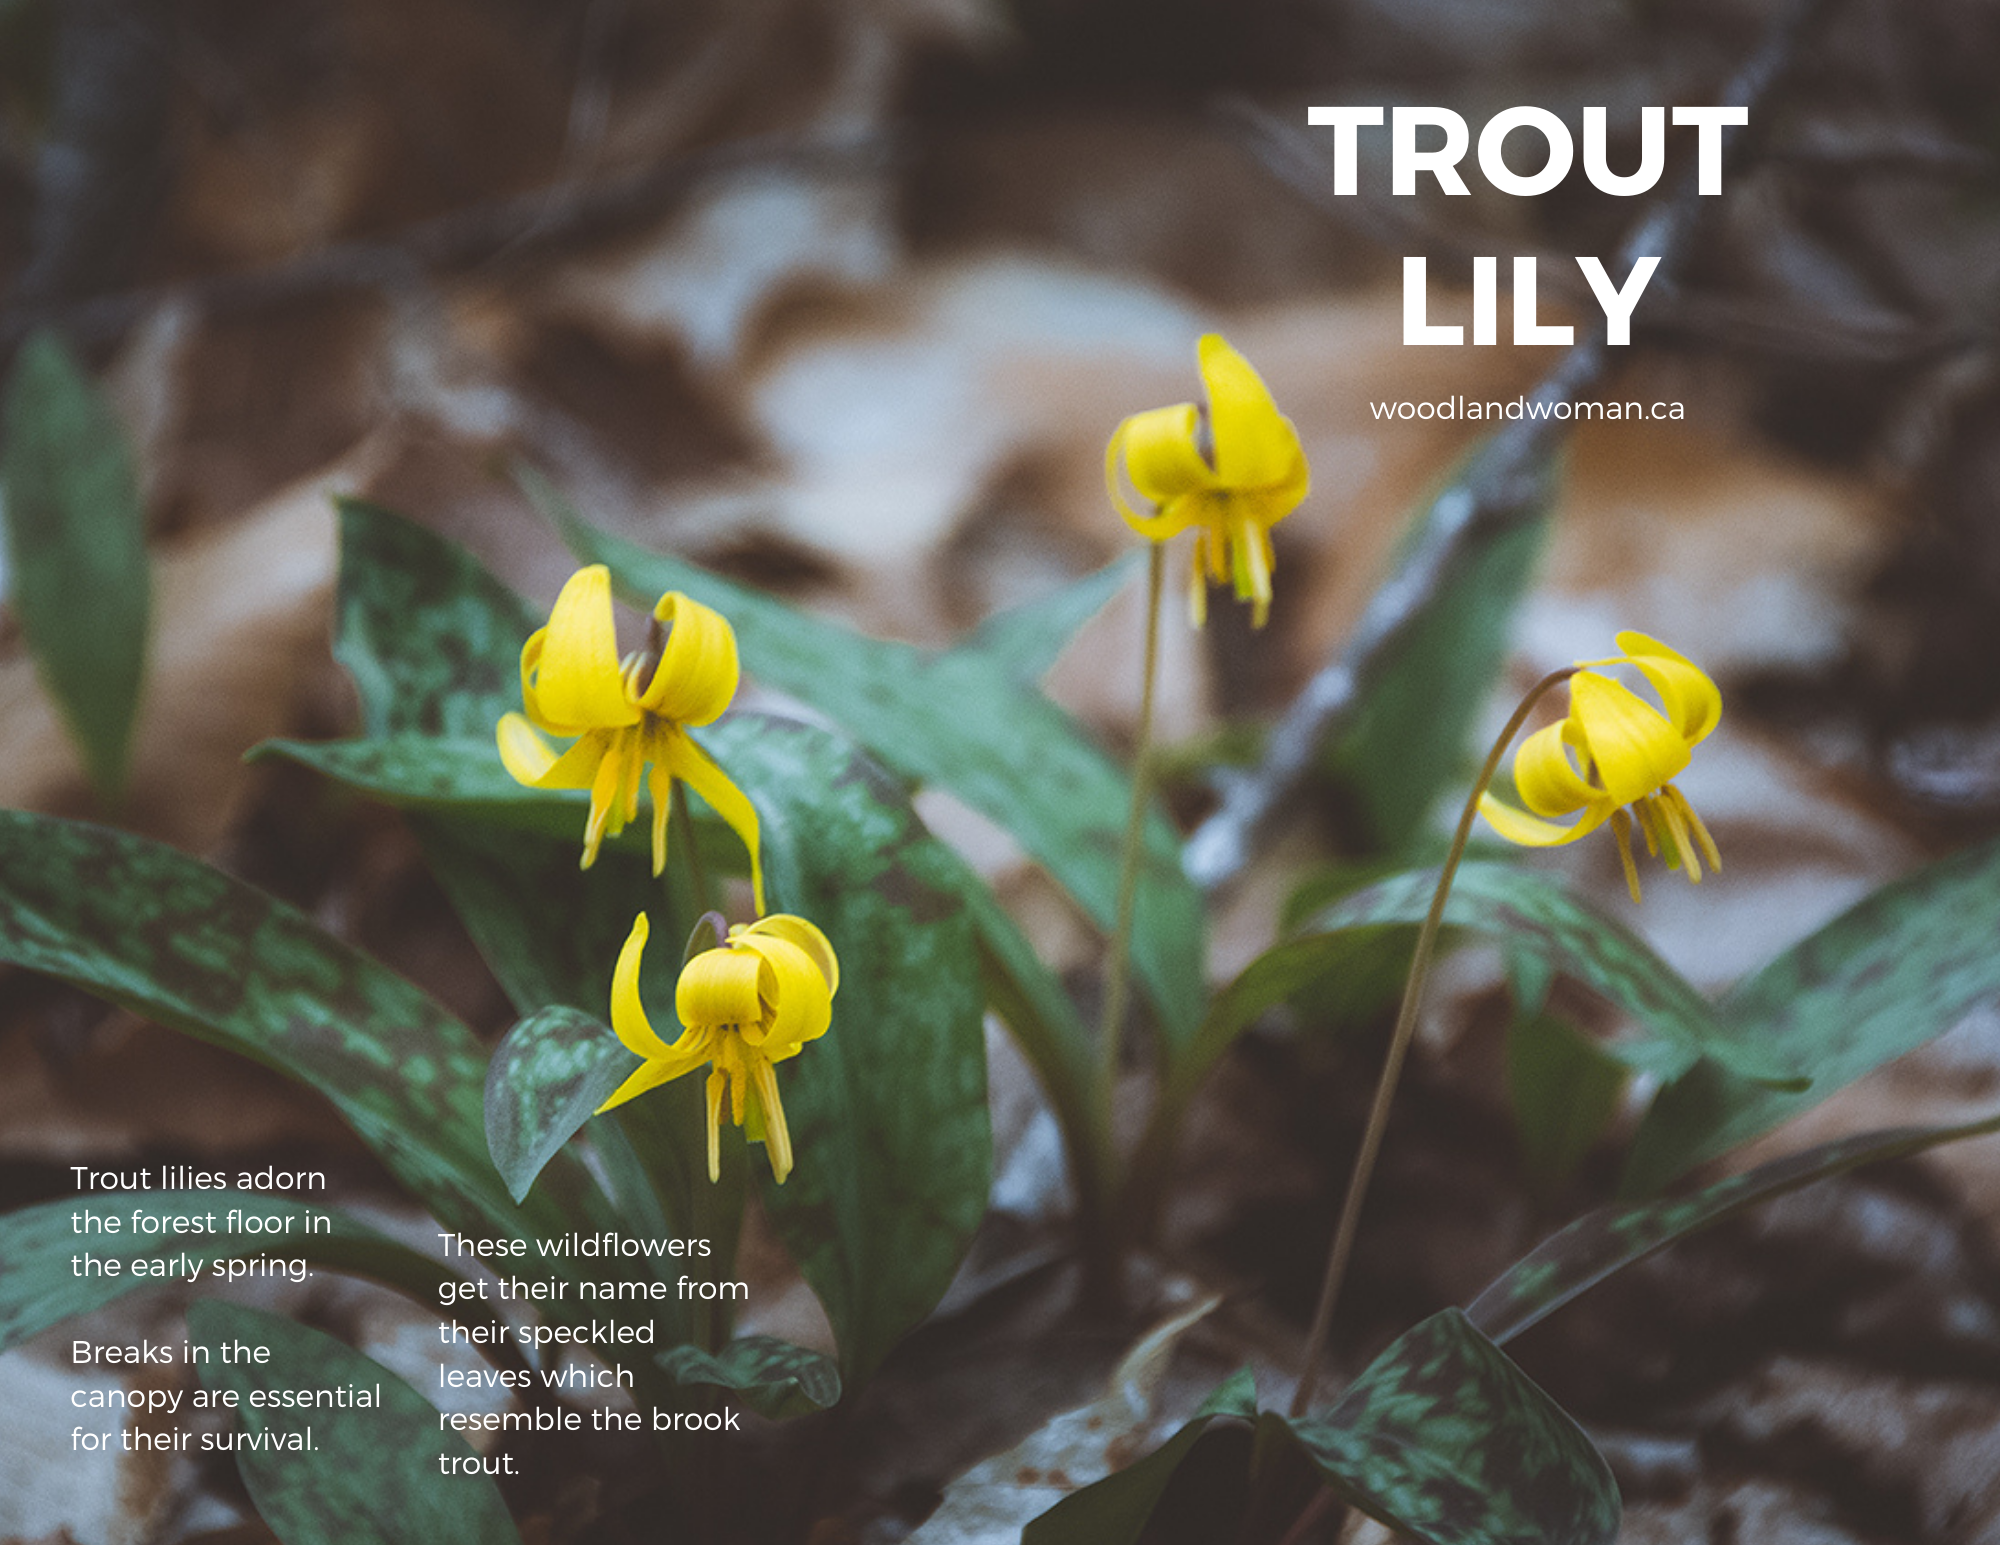 Photo shows 4 trout lily flower growing together.